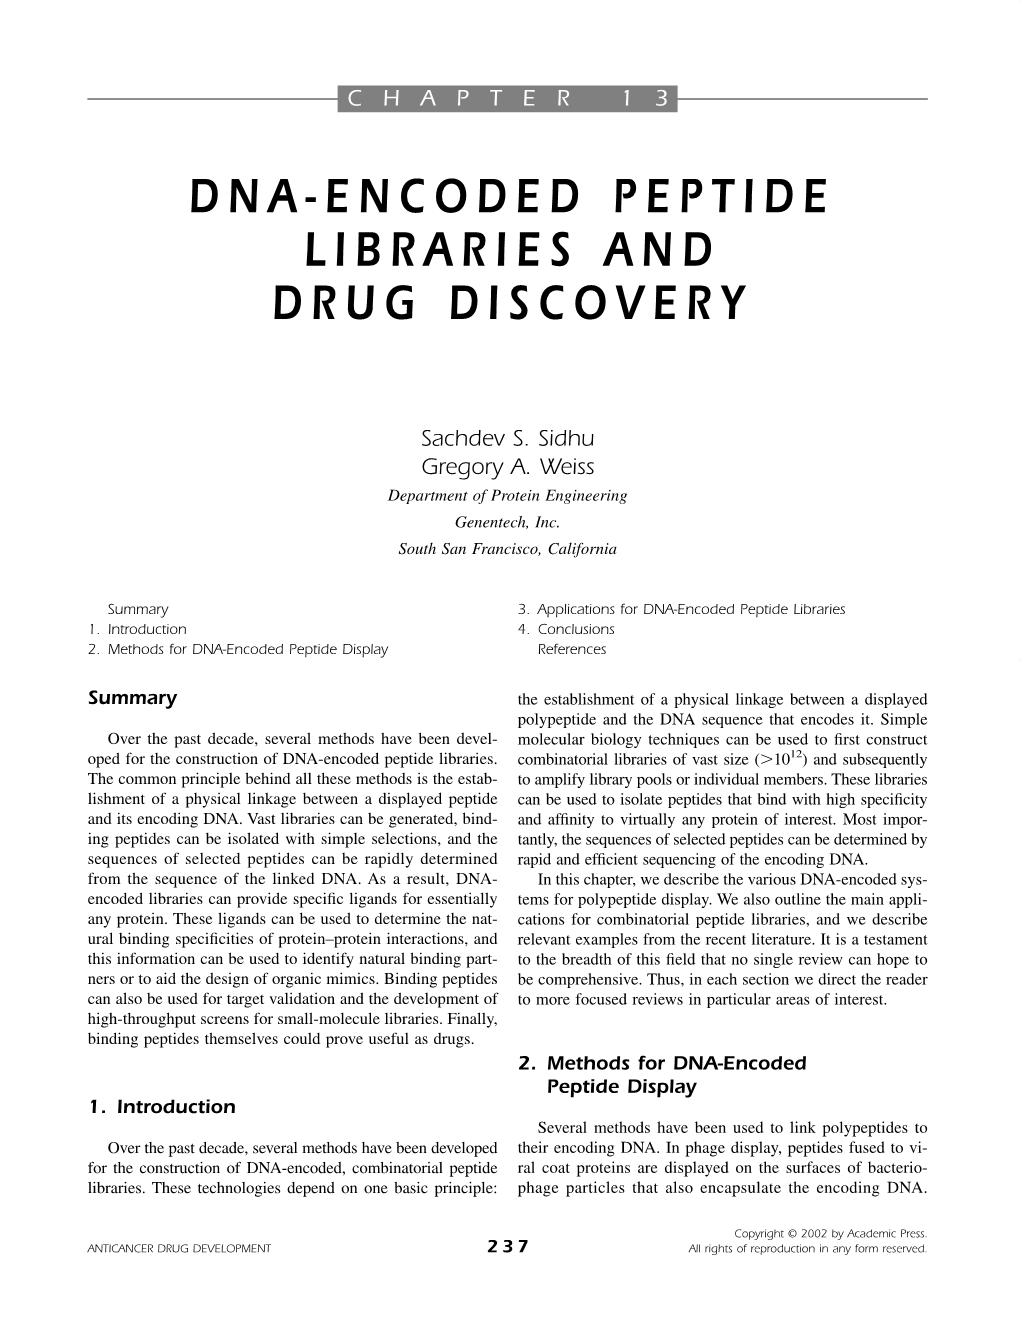 Dna-Encoded Peptide Libraries and Drug Discovery